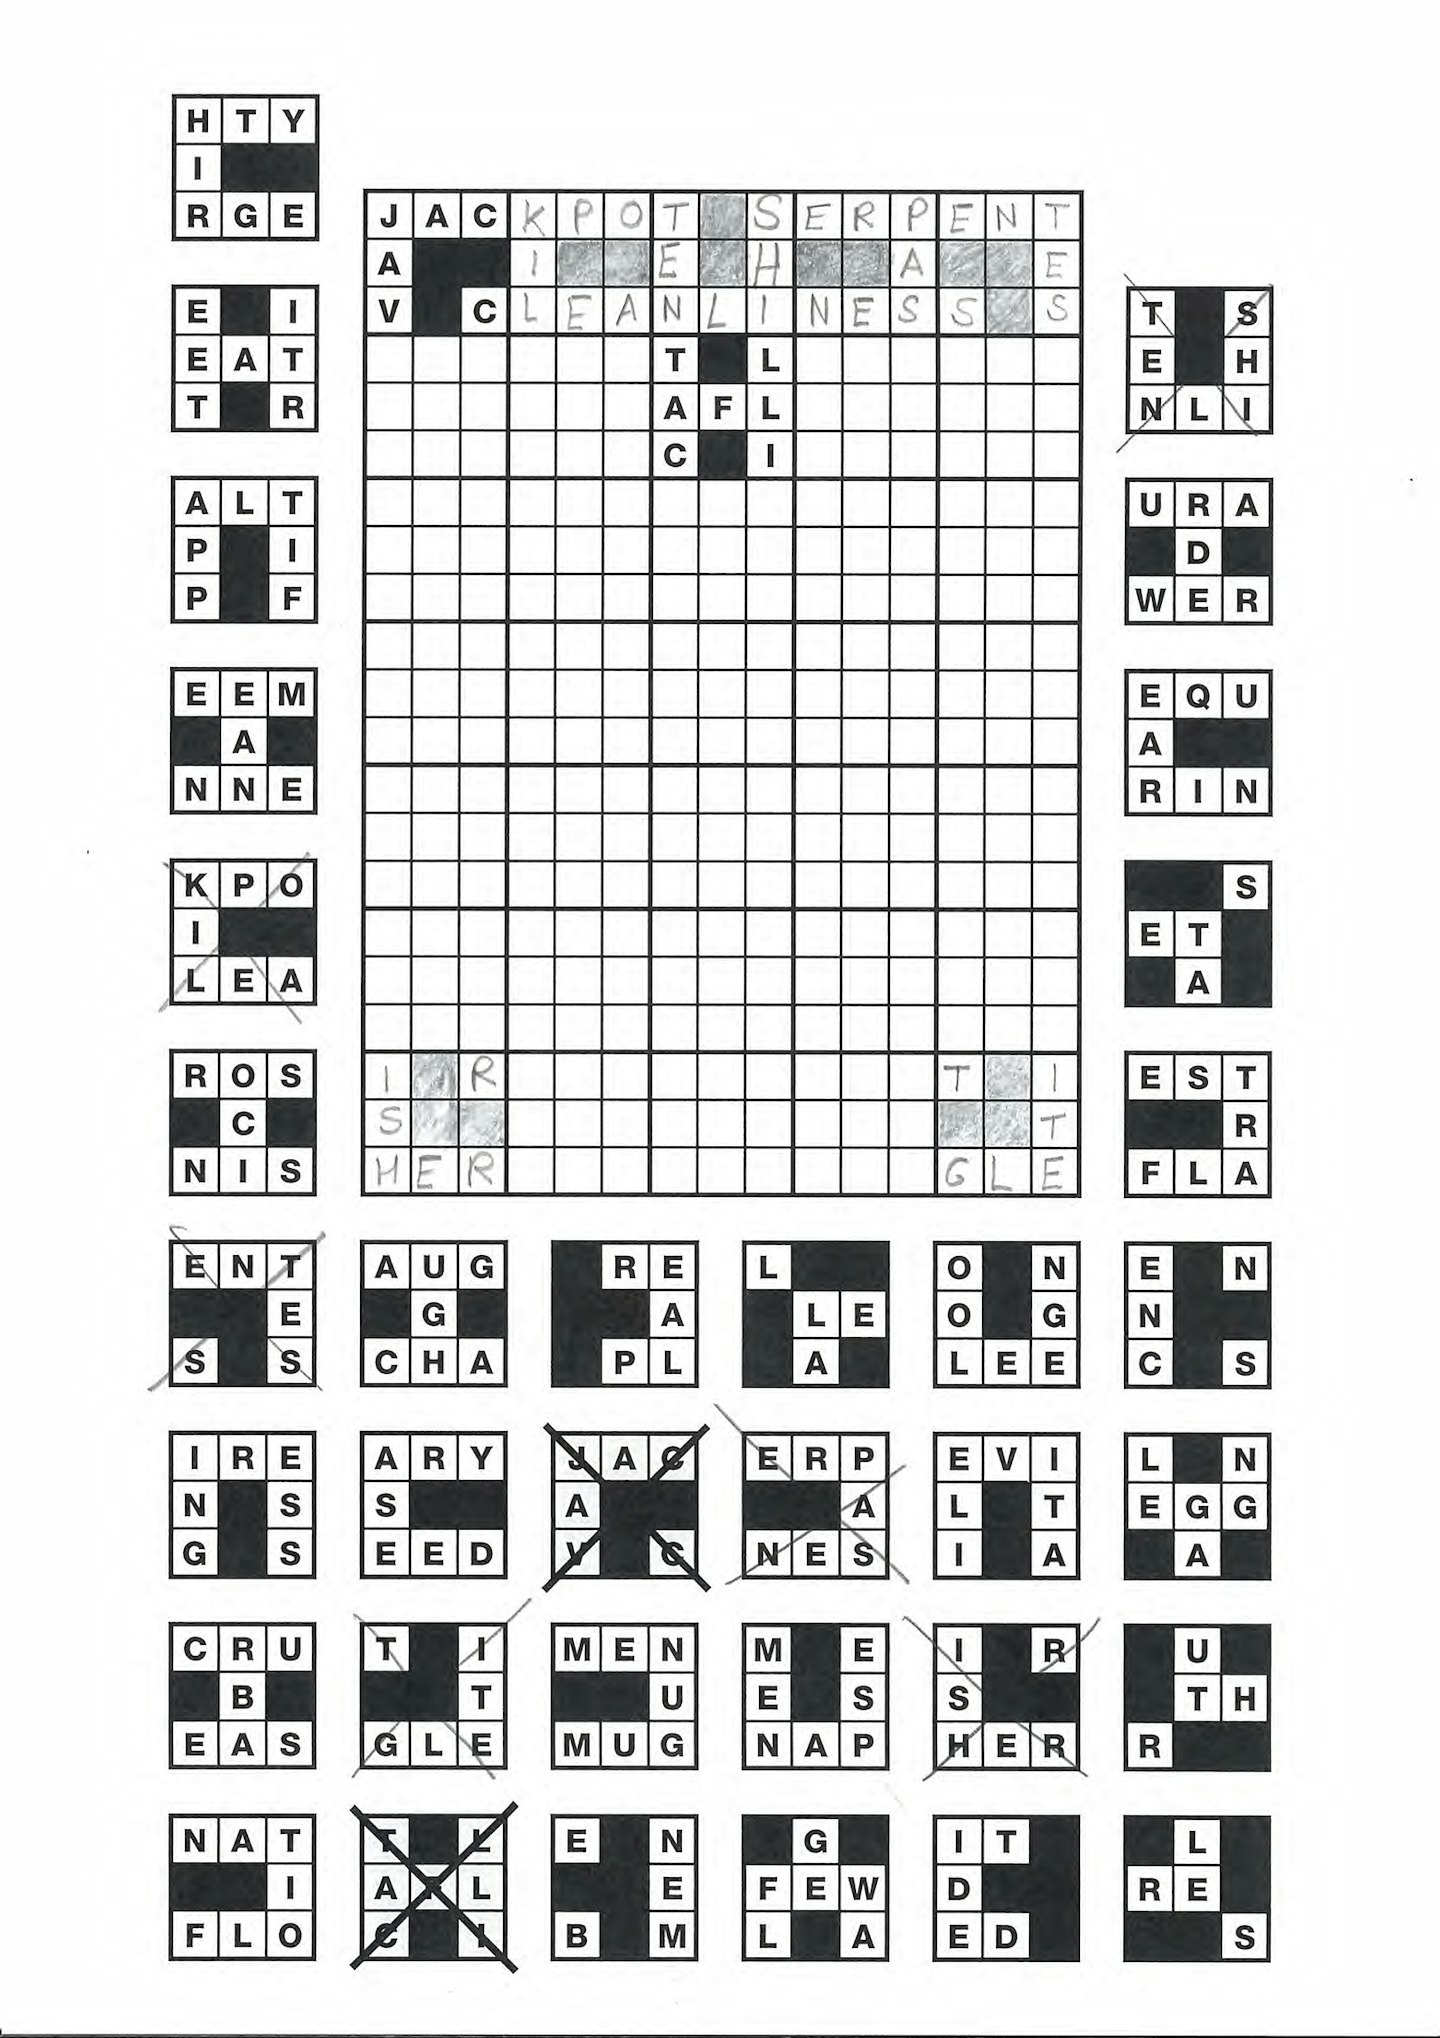 Bits and Pieces example grid 2